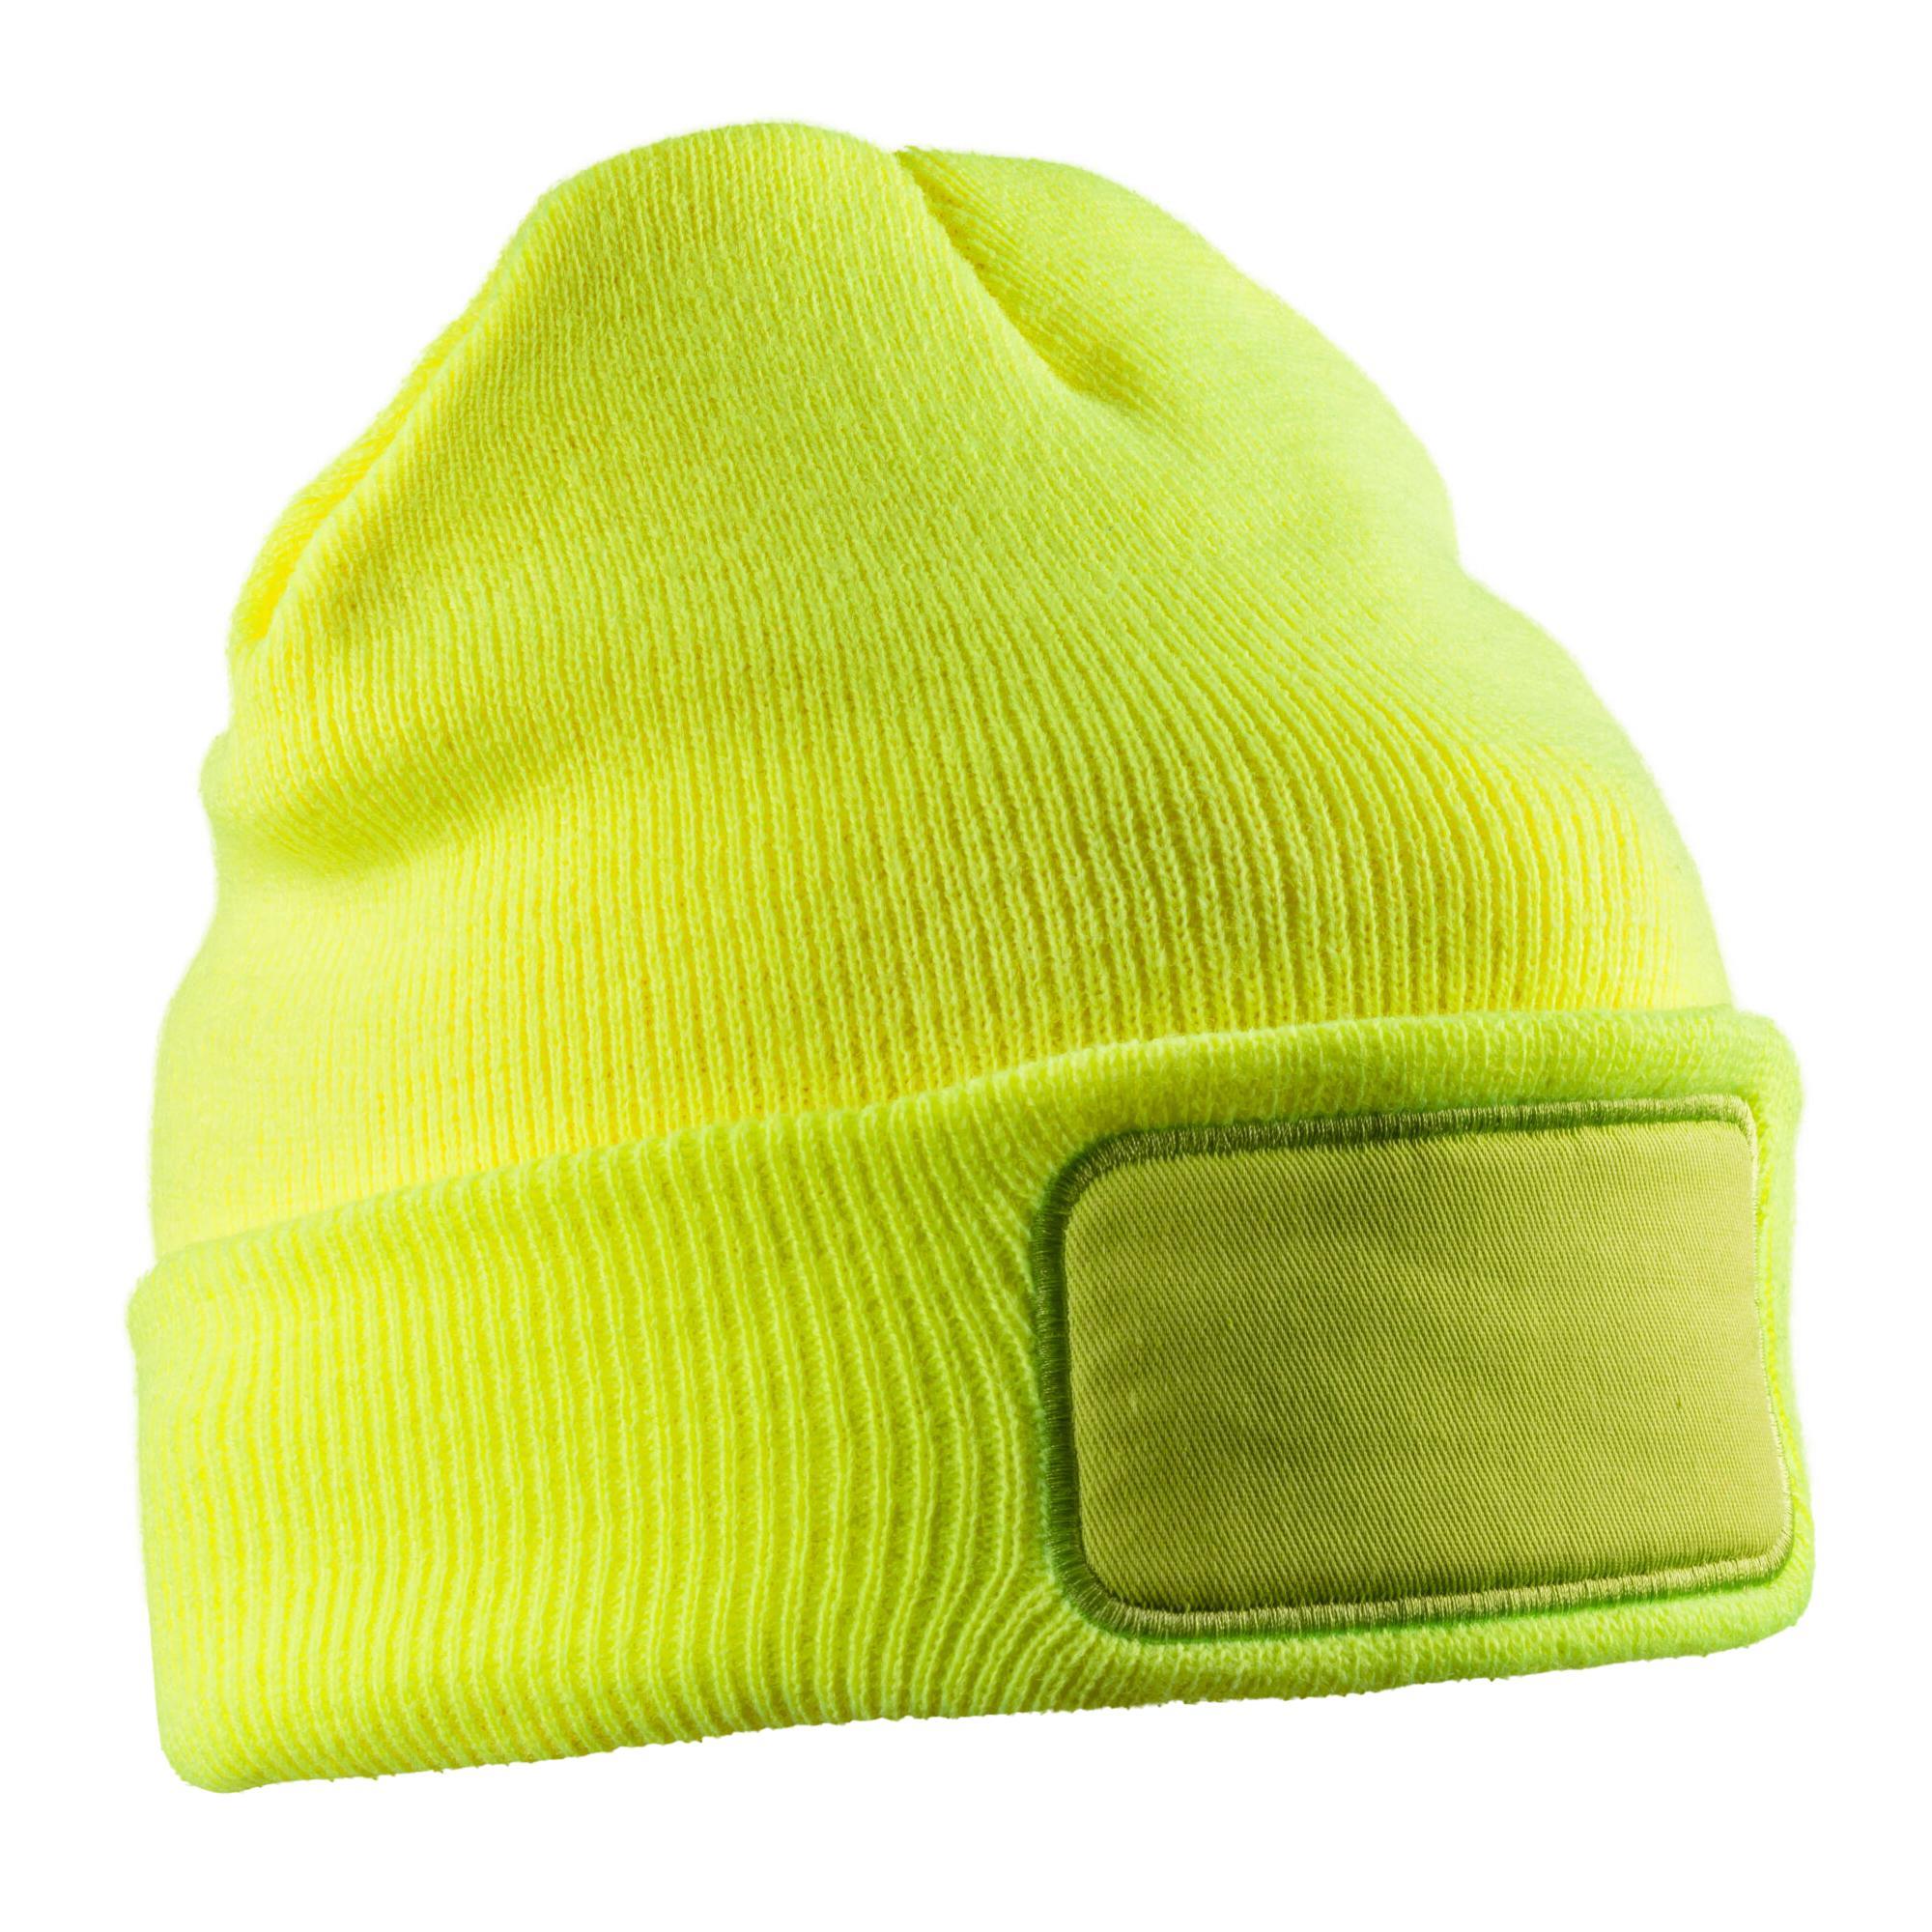 Result Unisex Adult Thinsulate Printable Winter Beanie (Fluorescent Yellow) (One Size)